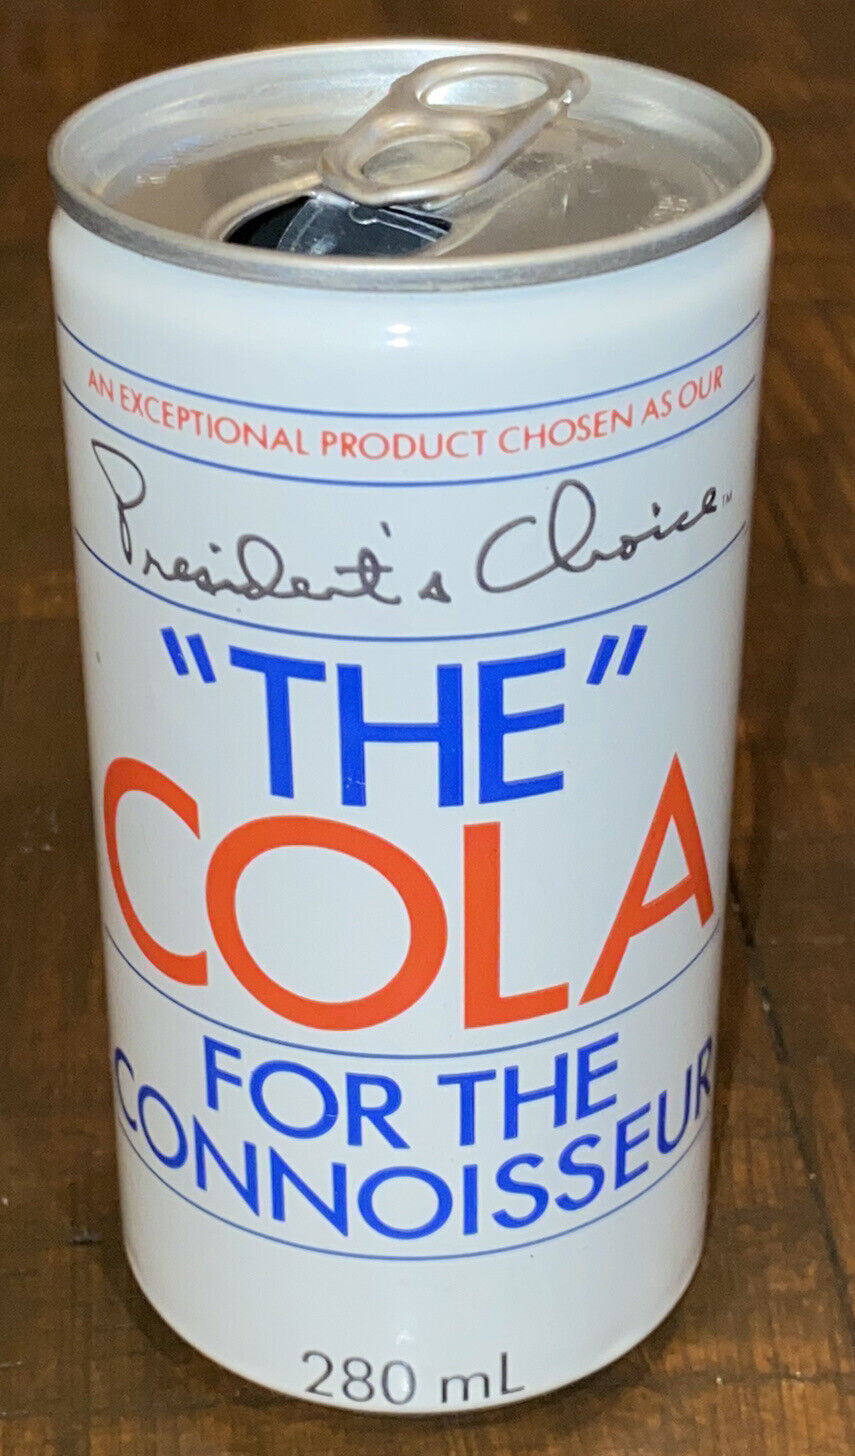 President’s Choice “The” Cola for the Connoisseur vintage can 280 ml Collectors